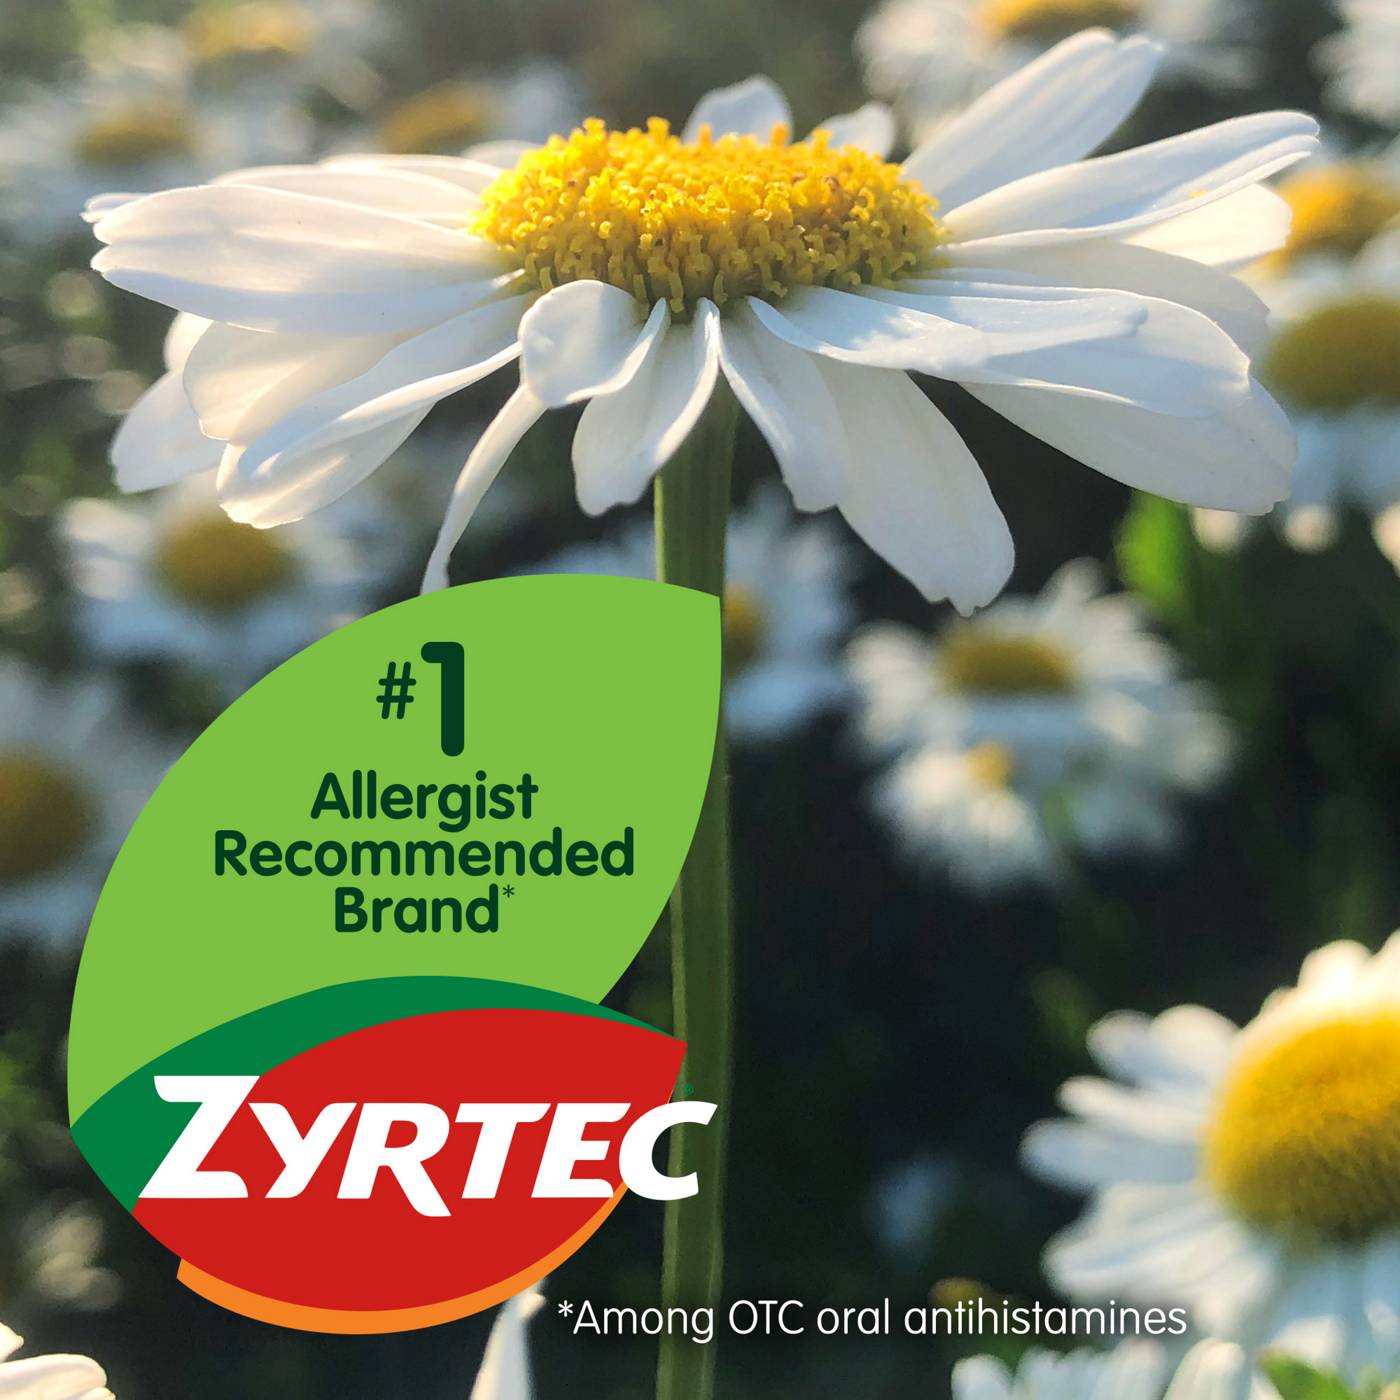 Zyrtec Allergy 24 Hour Relief Tablets - 10 Mg; image 2 of 6